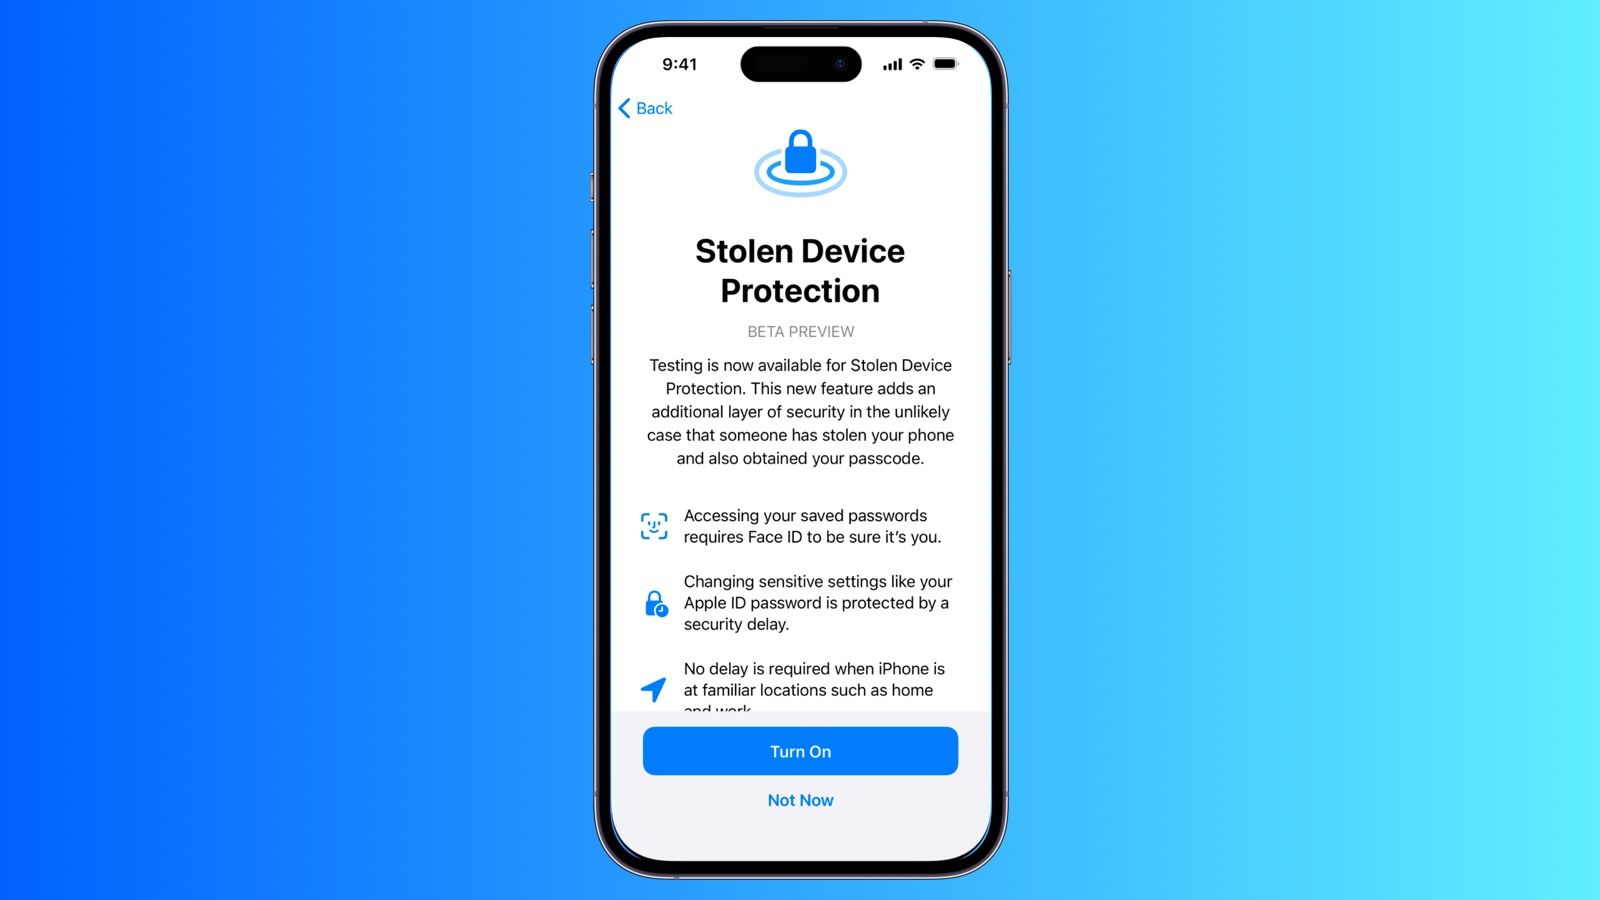 How to Enable Stolen Device Protection on iPhone - MacRumors